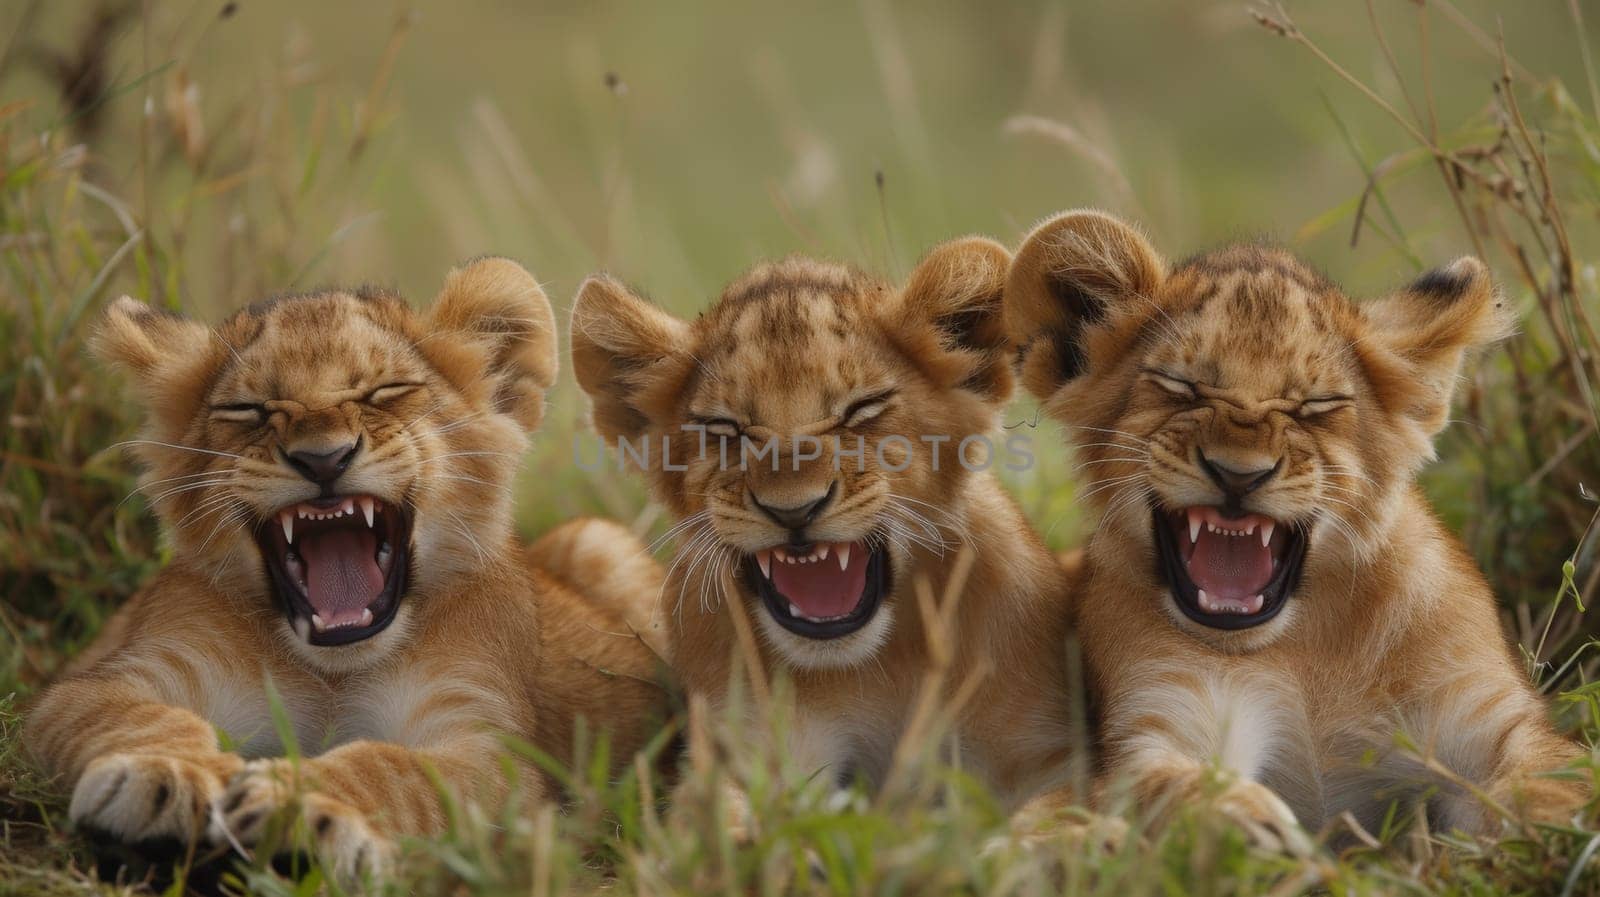 Three lion cubs are laying in the grass with their mouths open